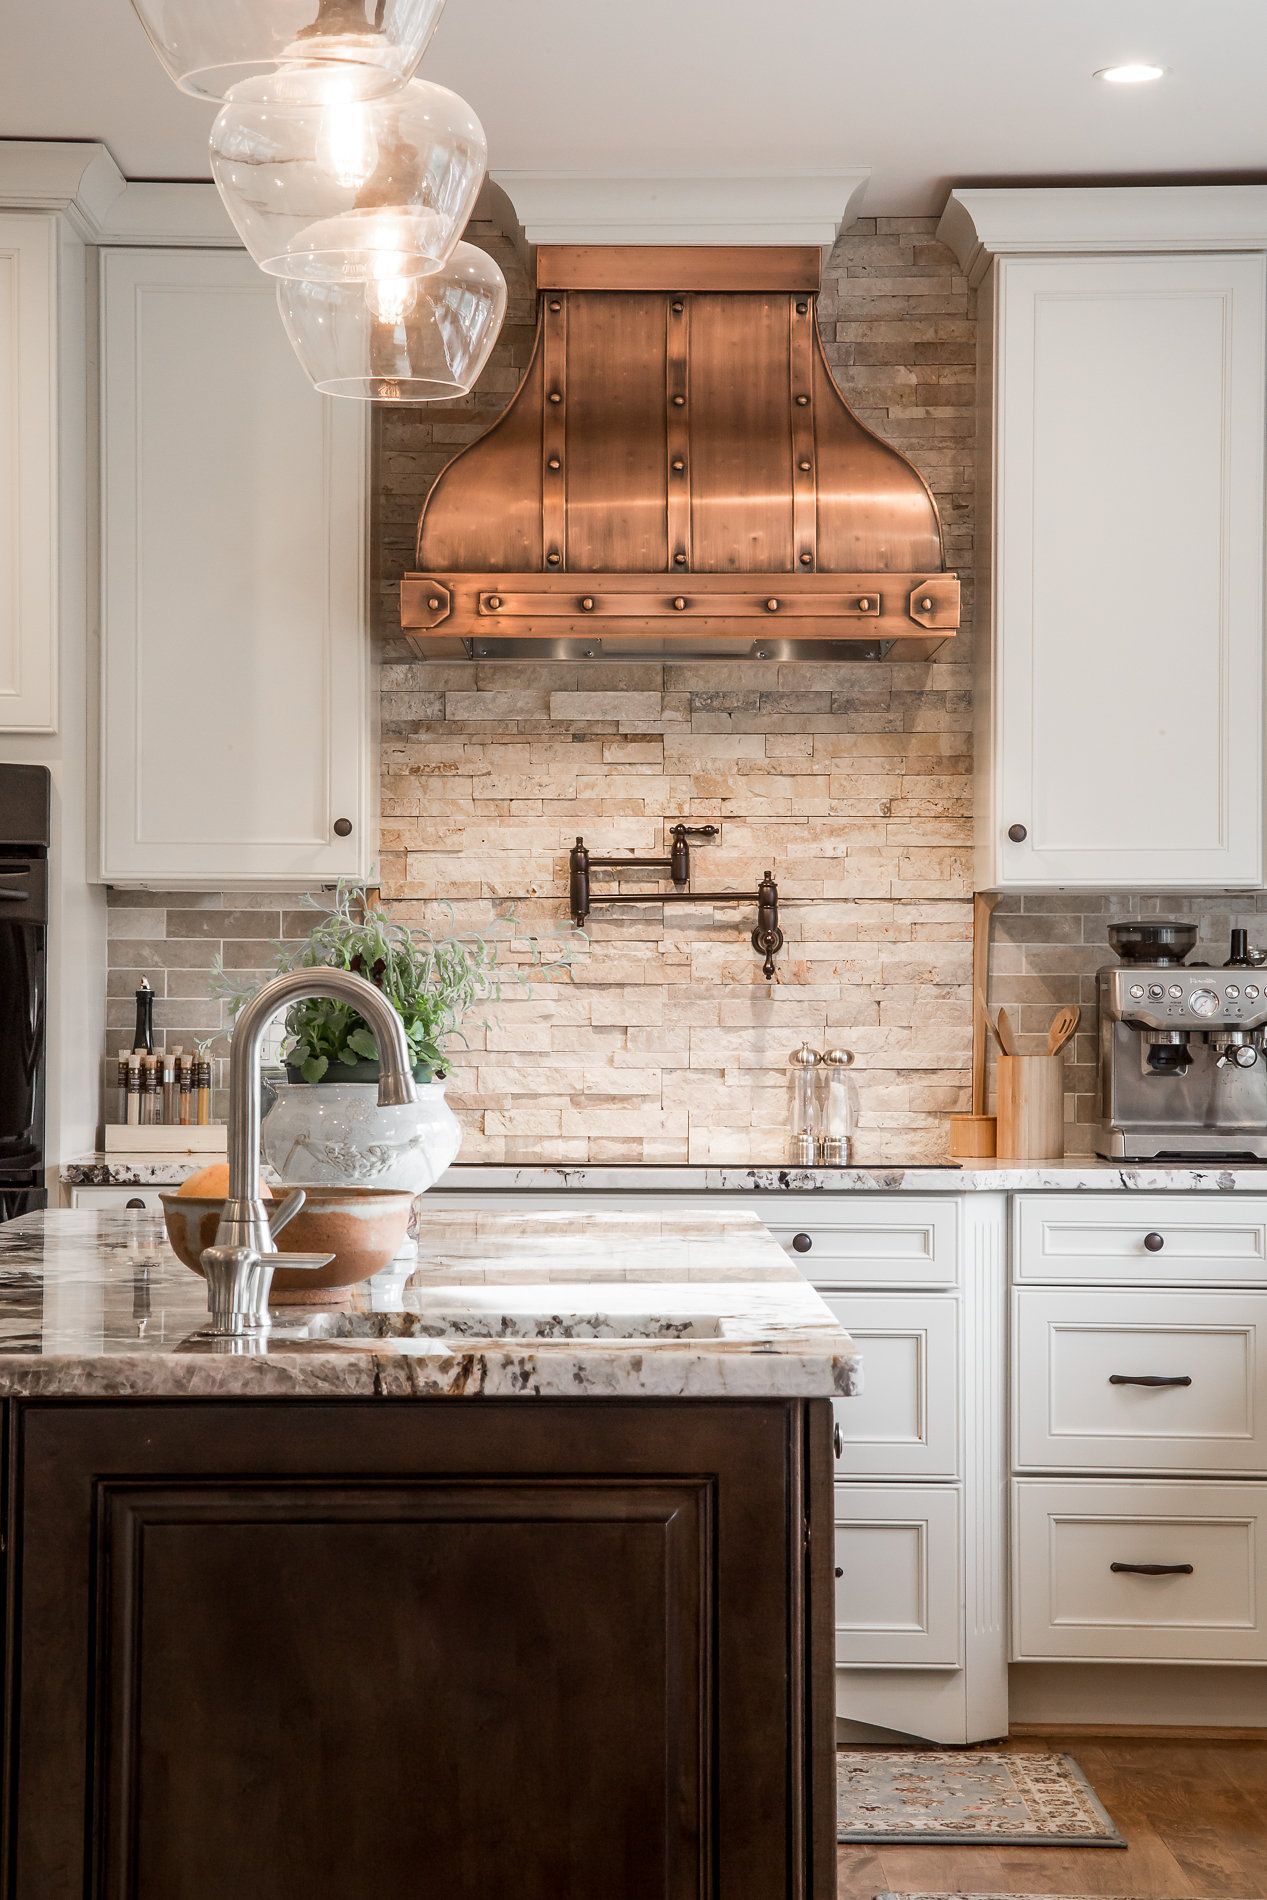 PIN 1 This is such a beautiful kitchen, love the mis-matched hardware finishes. Th